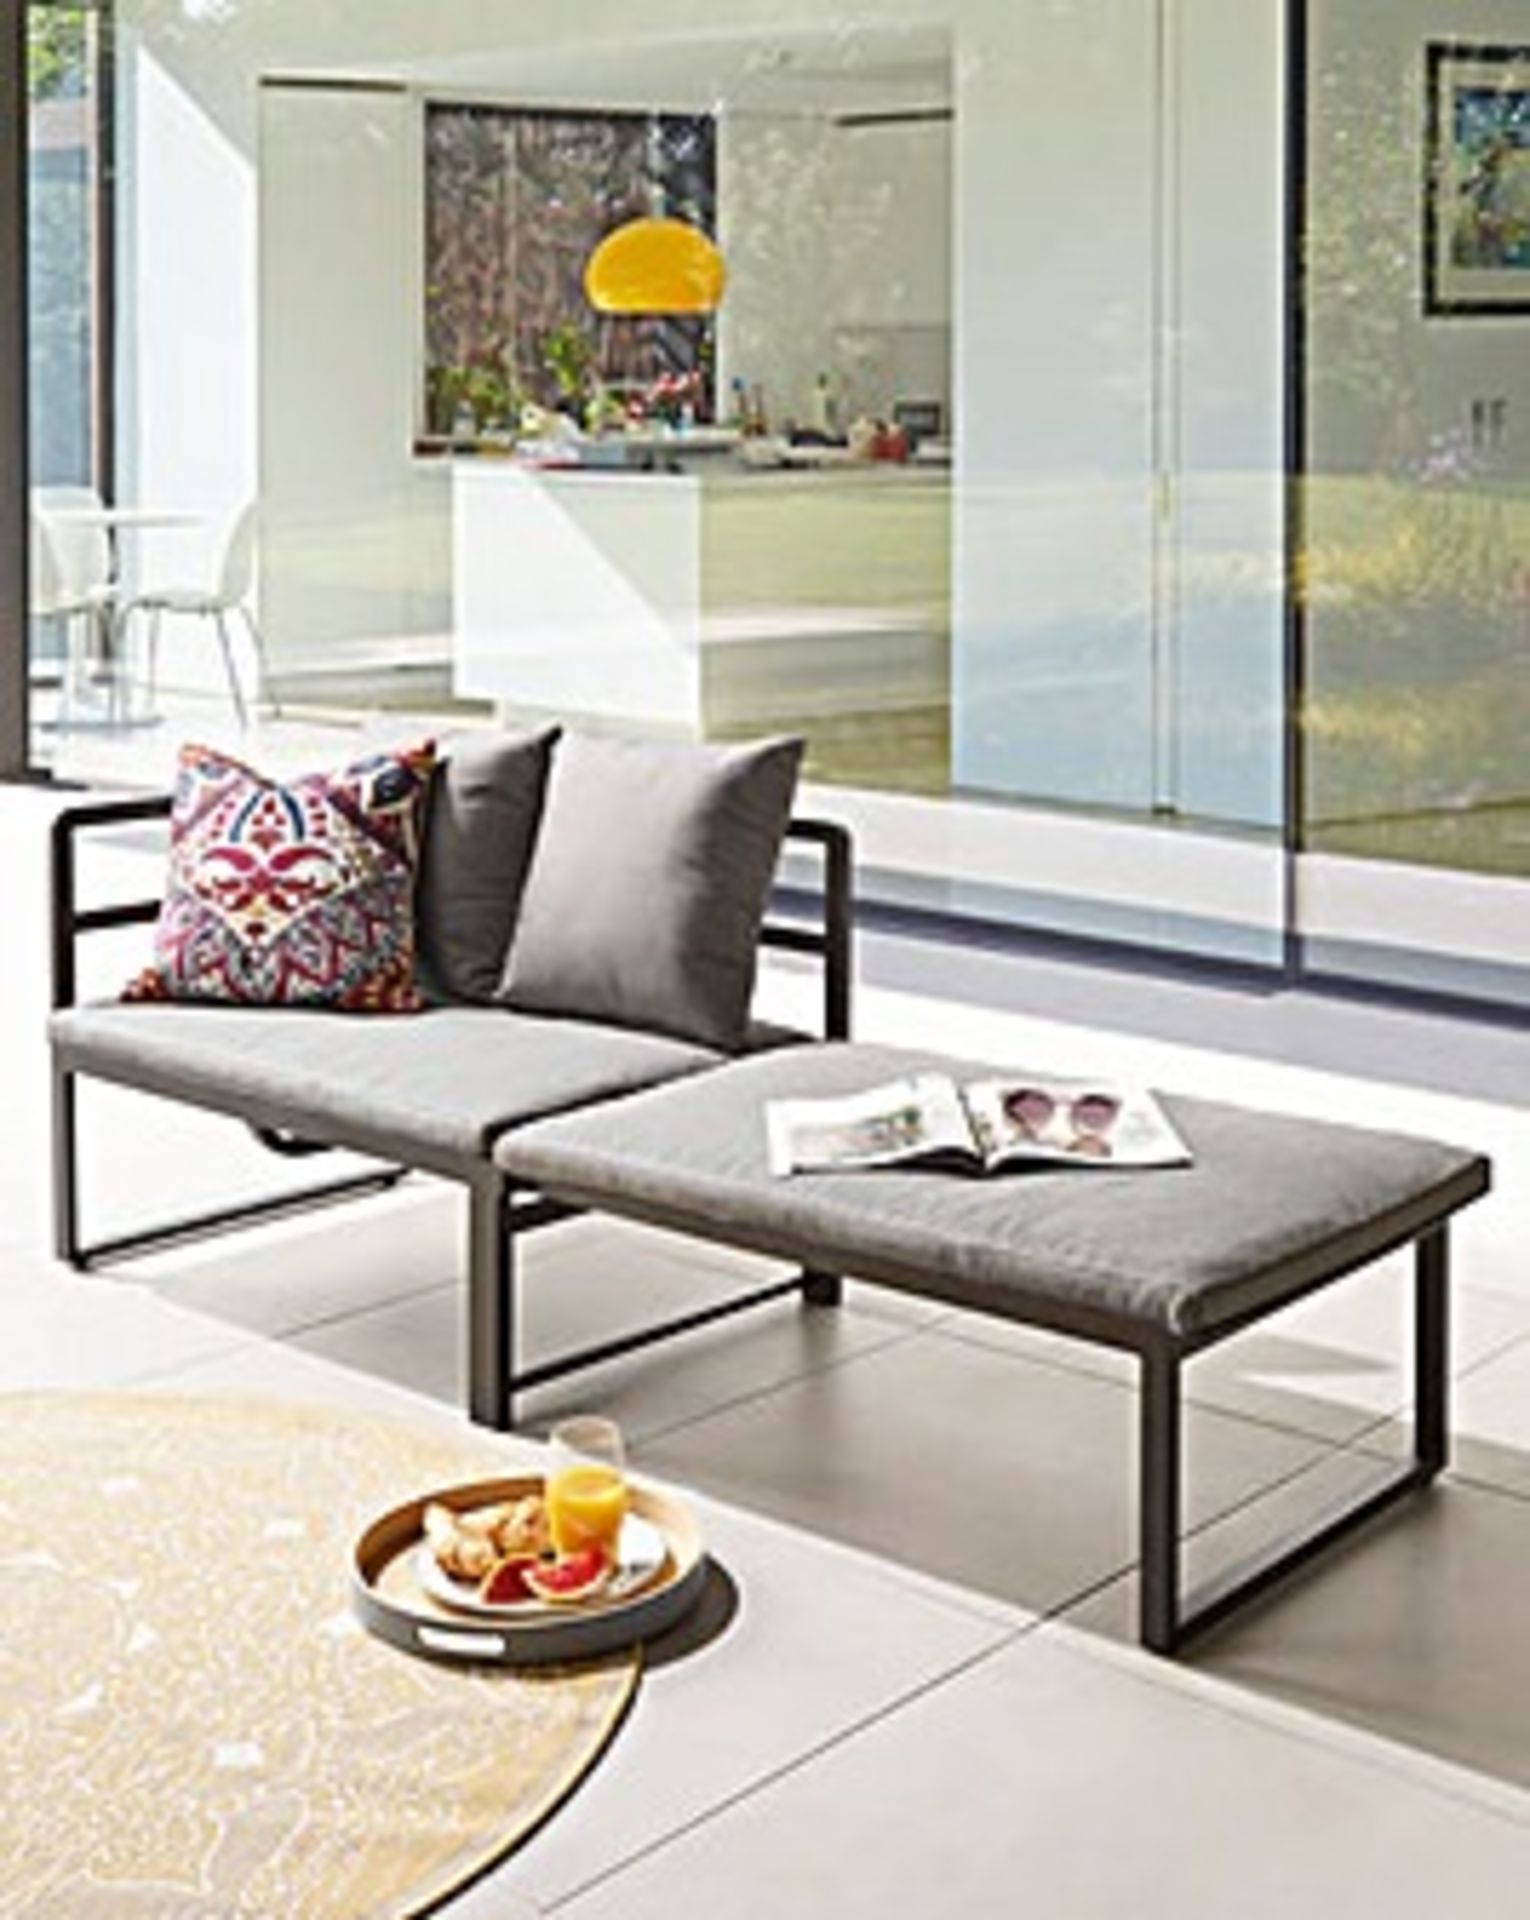 TRADE LOT 4 x BRAND NEW LUXURY EXTENDABLE PATIO BENCH. RRP £225 EACH. This contemporary extendable